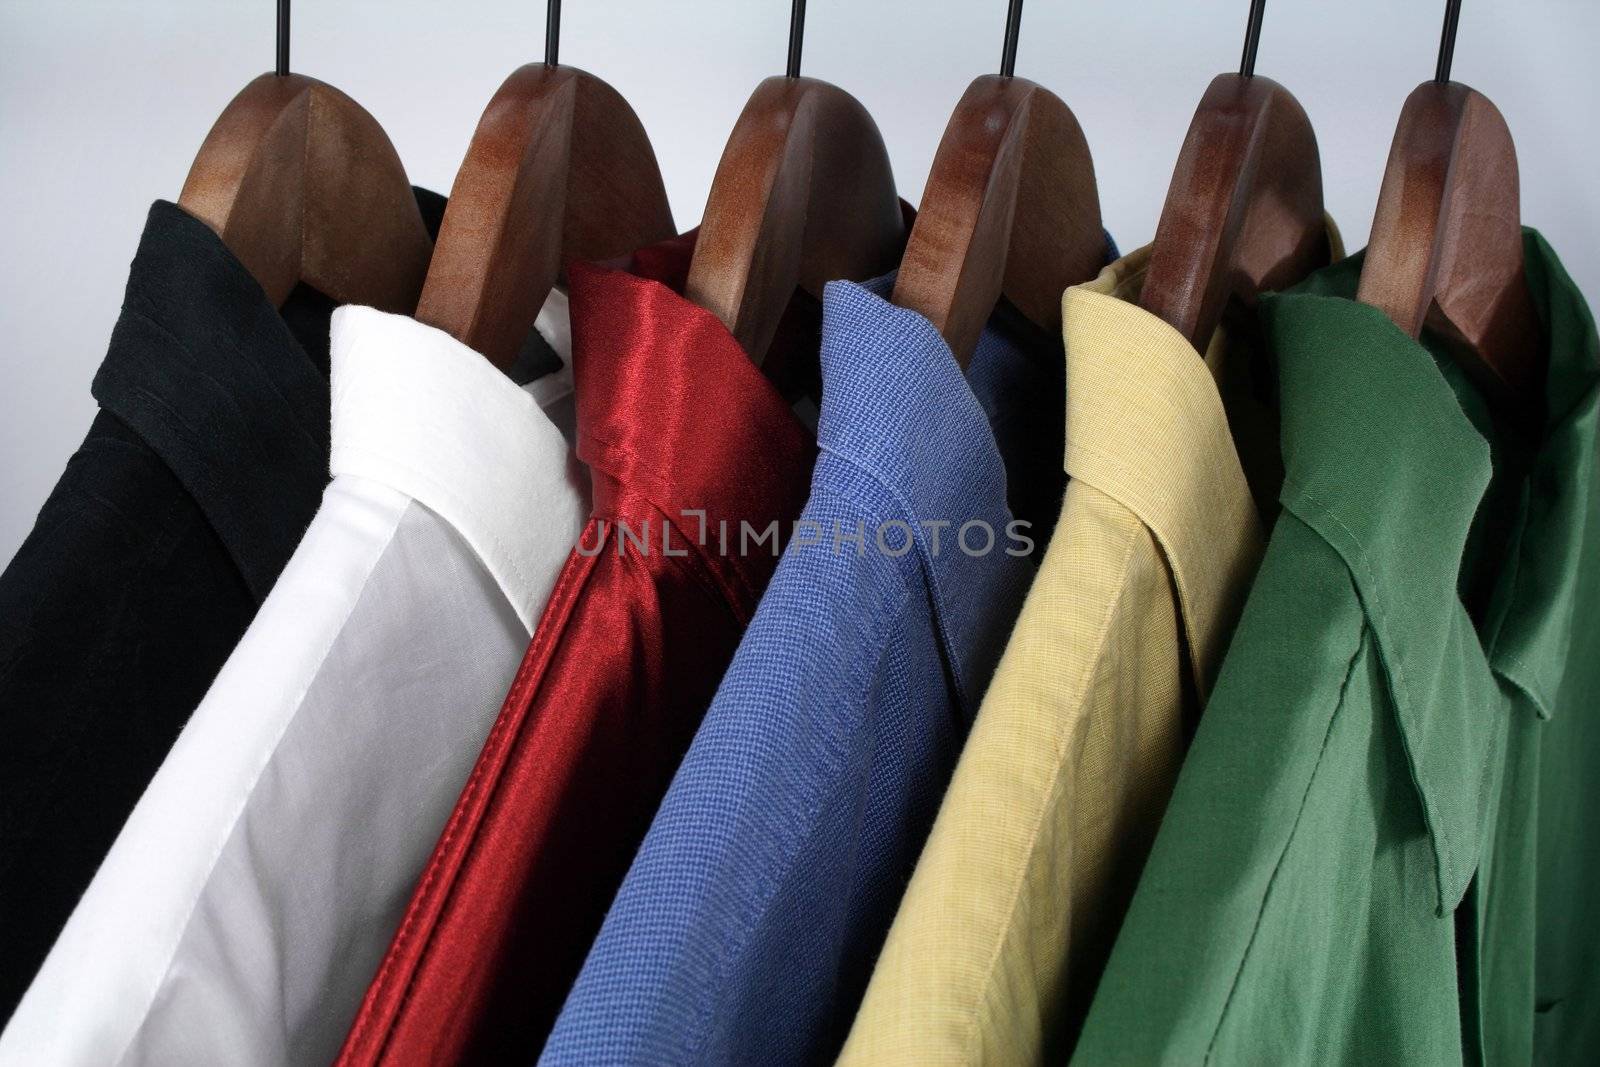 Man's wear - choice of colorful shirts on wooden hangers.